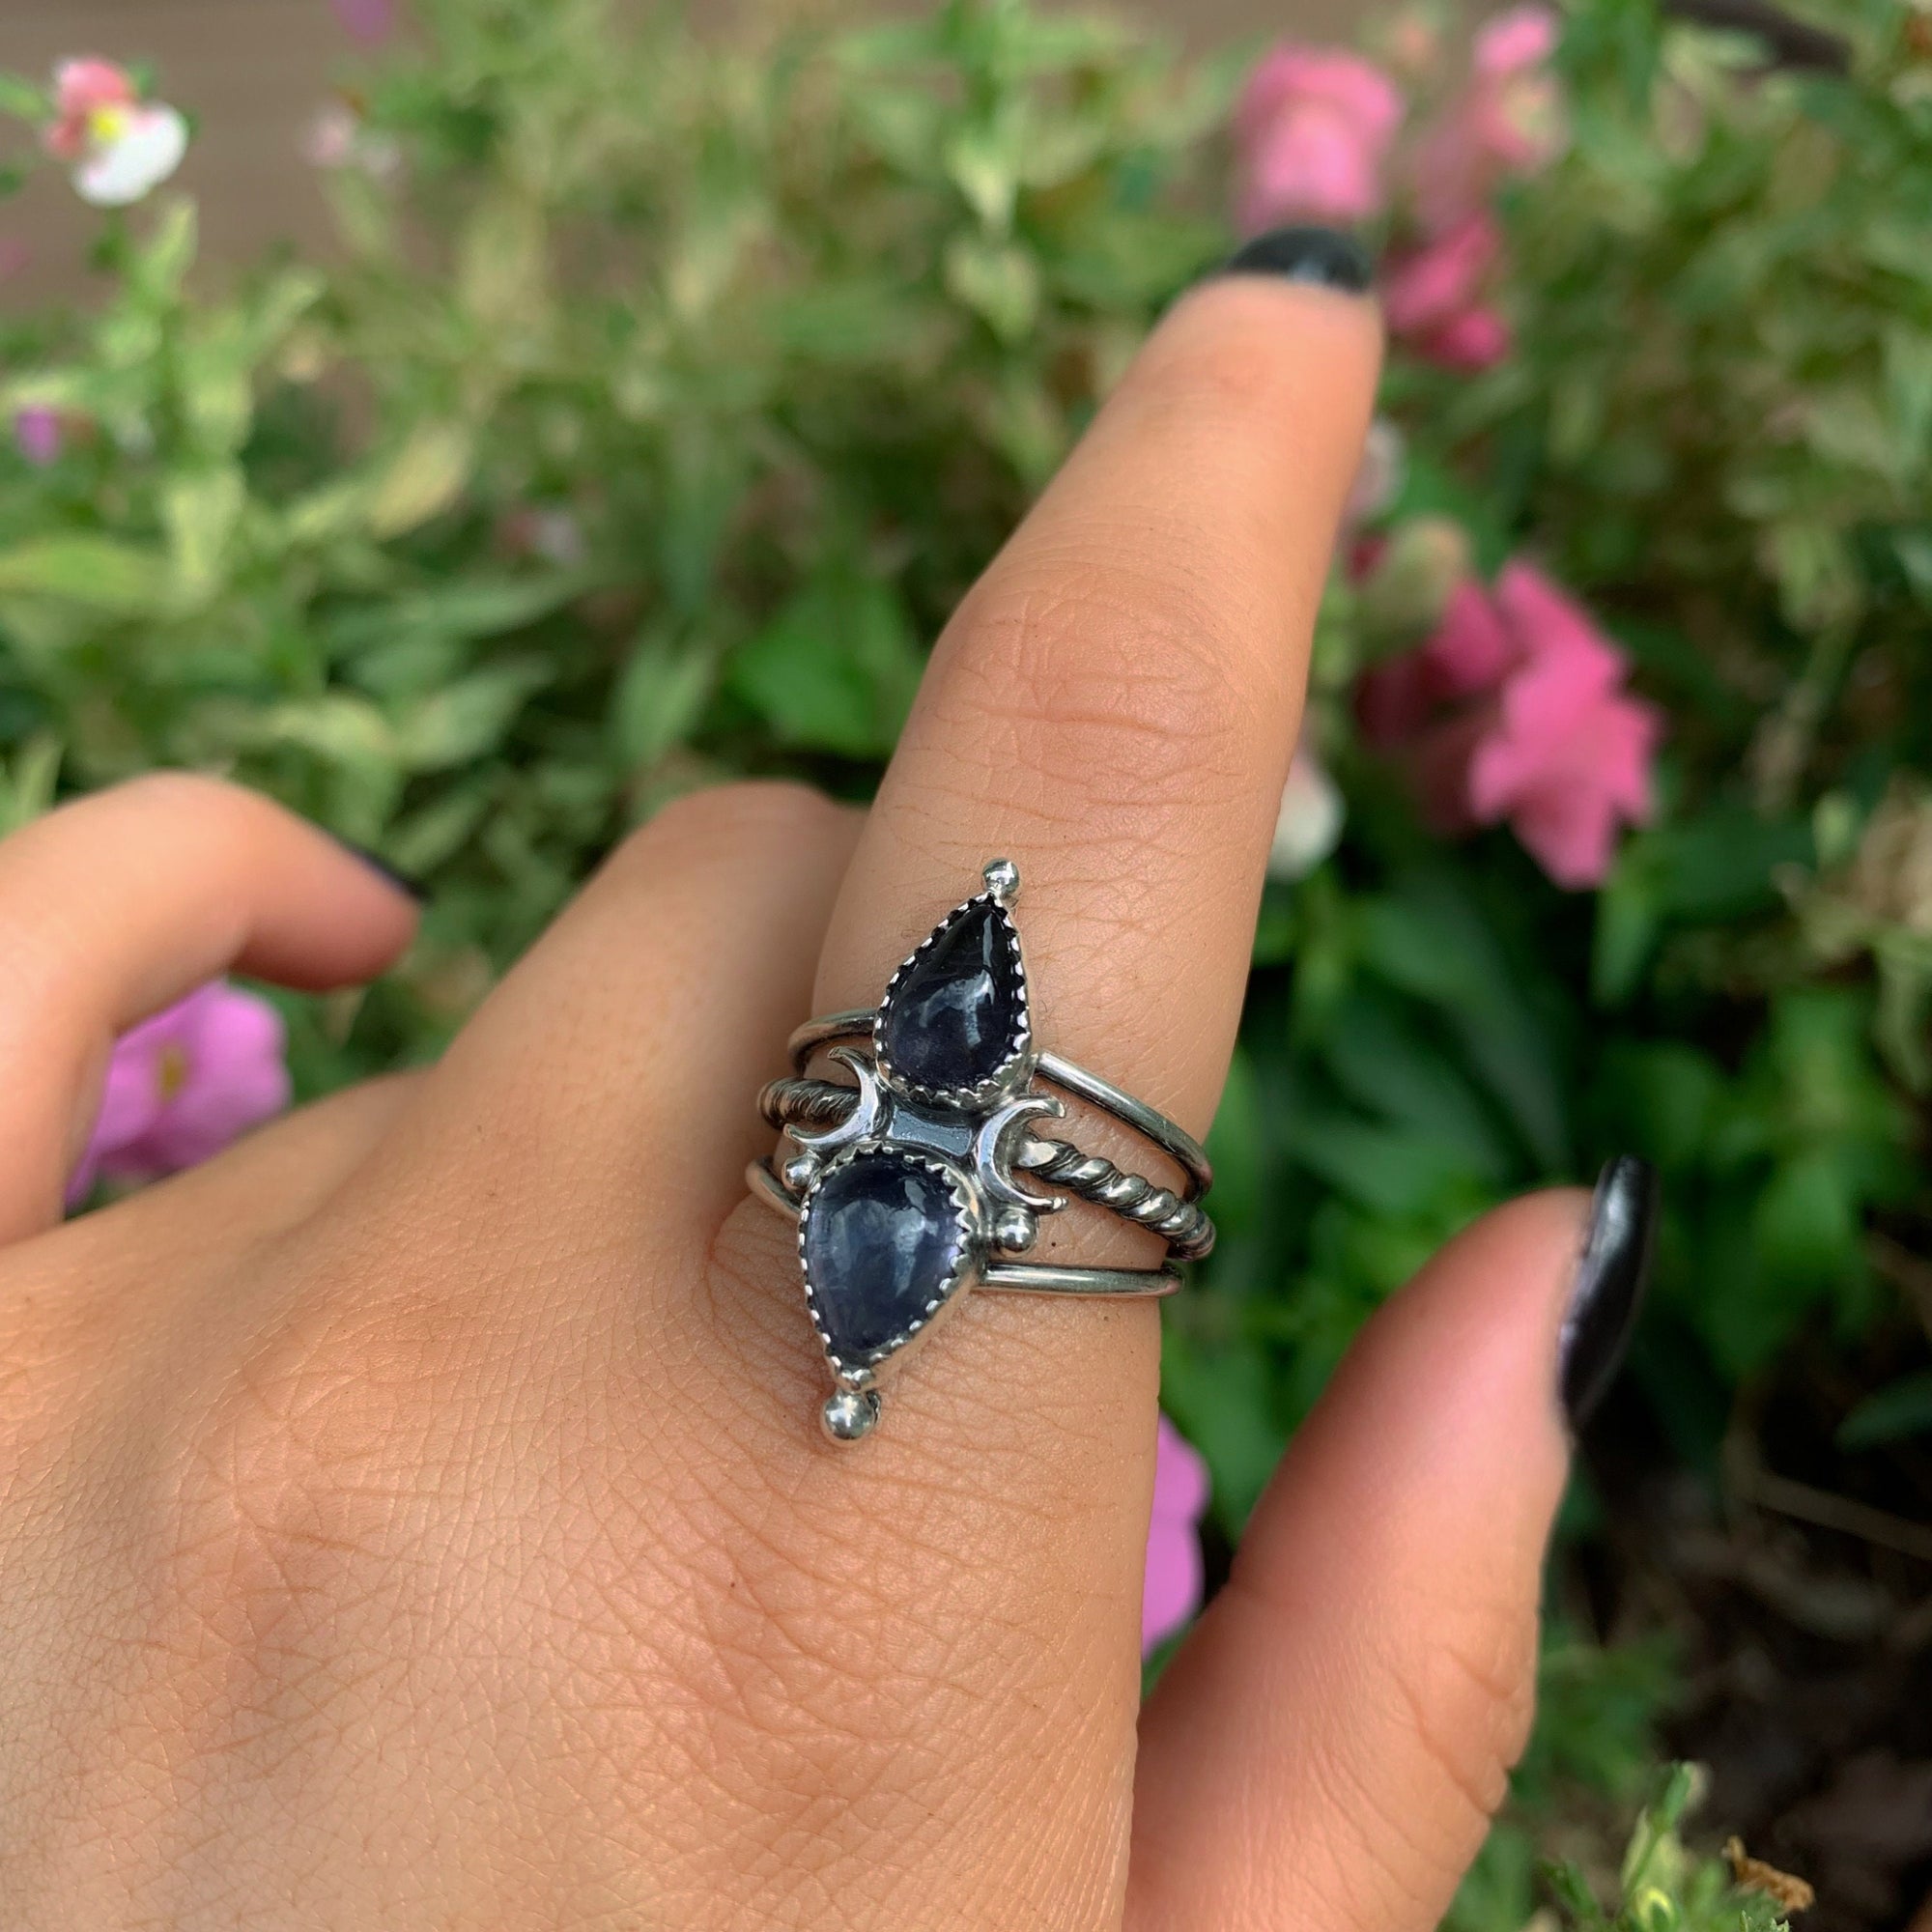 Iolite Ring - Size 8 to 8 1/4 - Sterling Silver - Double Iolite Moon Ring - Iolite Jewellery - Crescent Moon Double Stone Ring - Triple Band